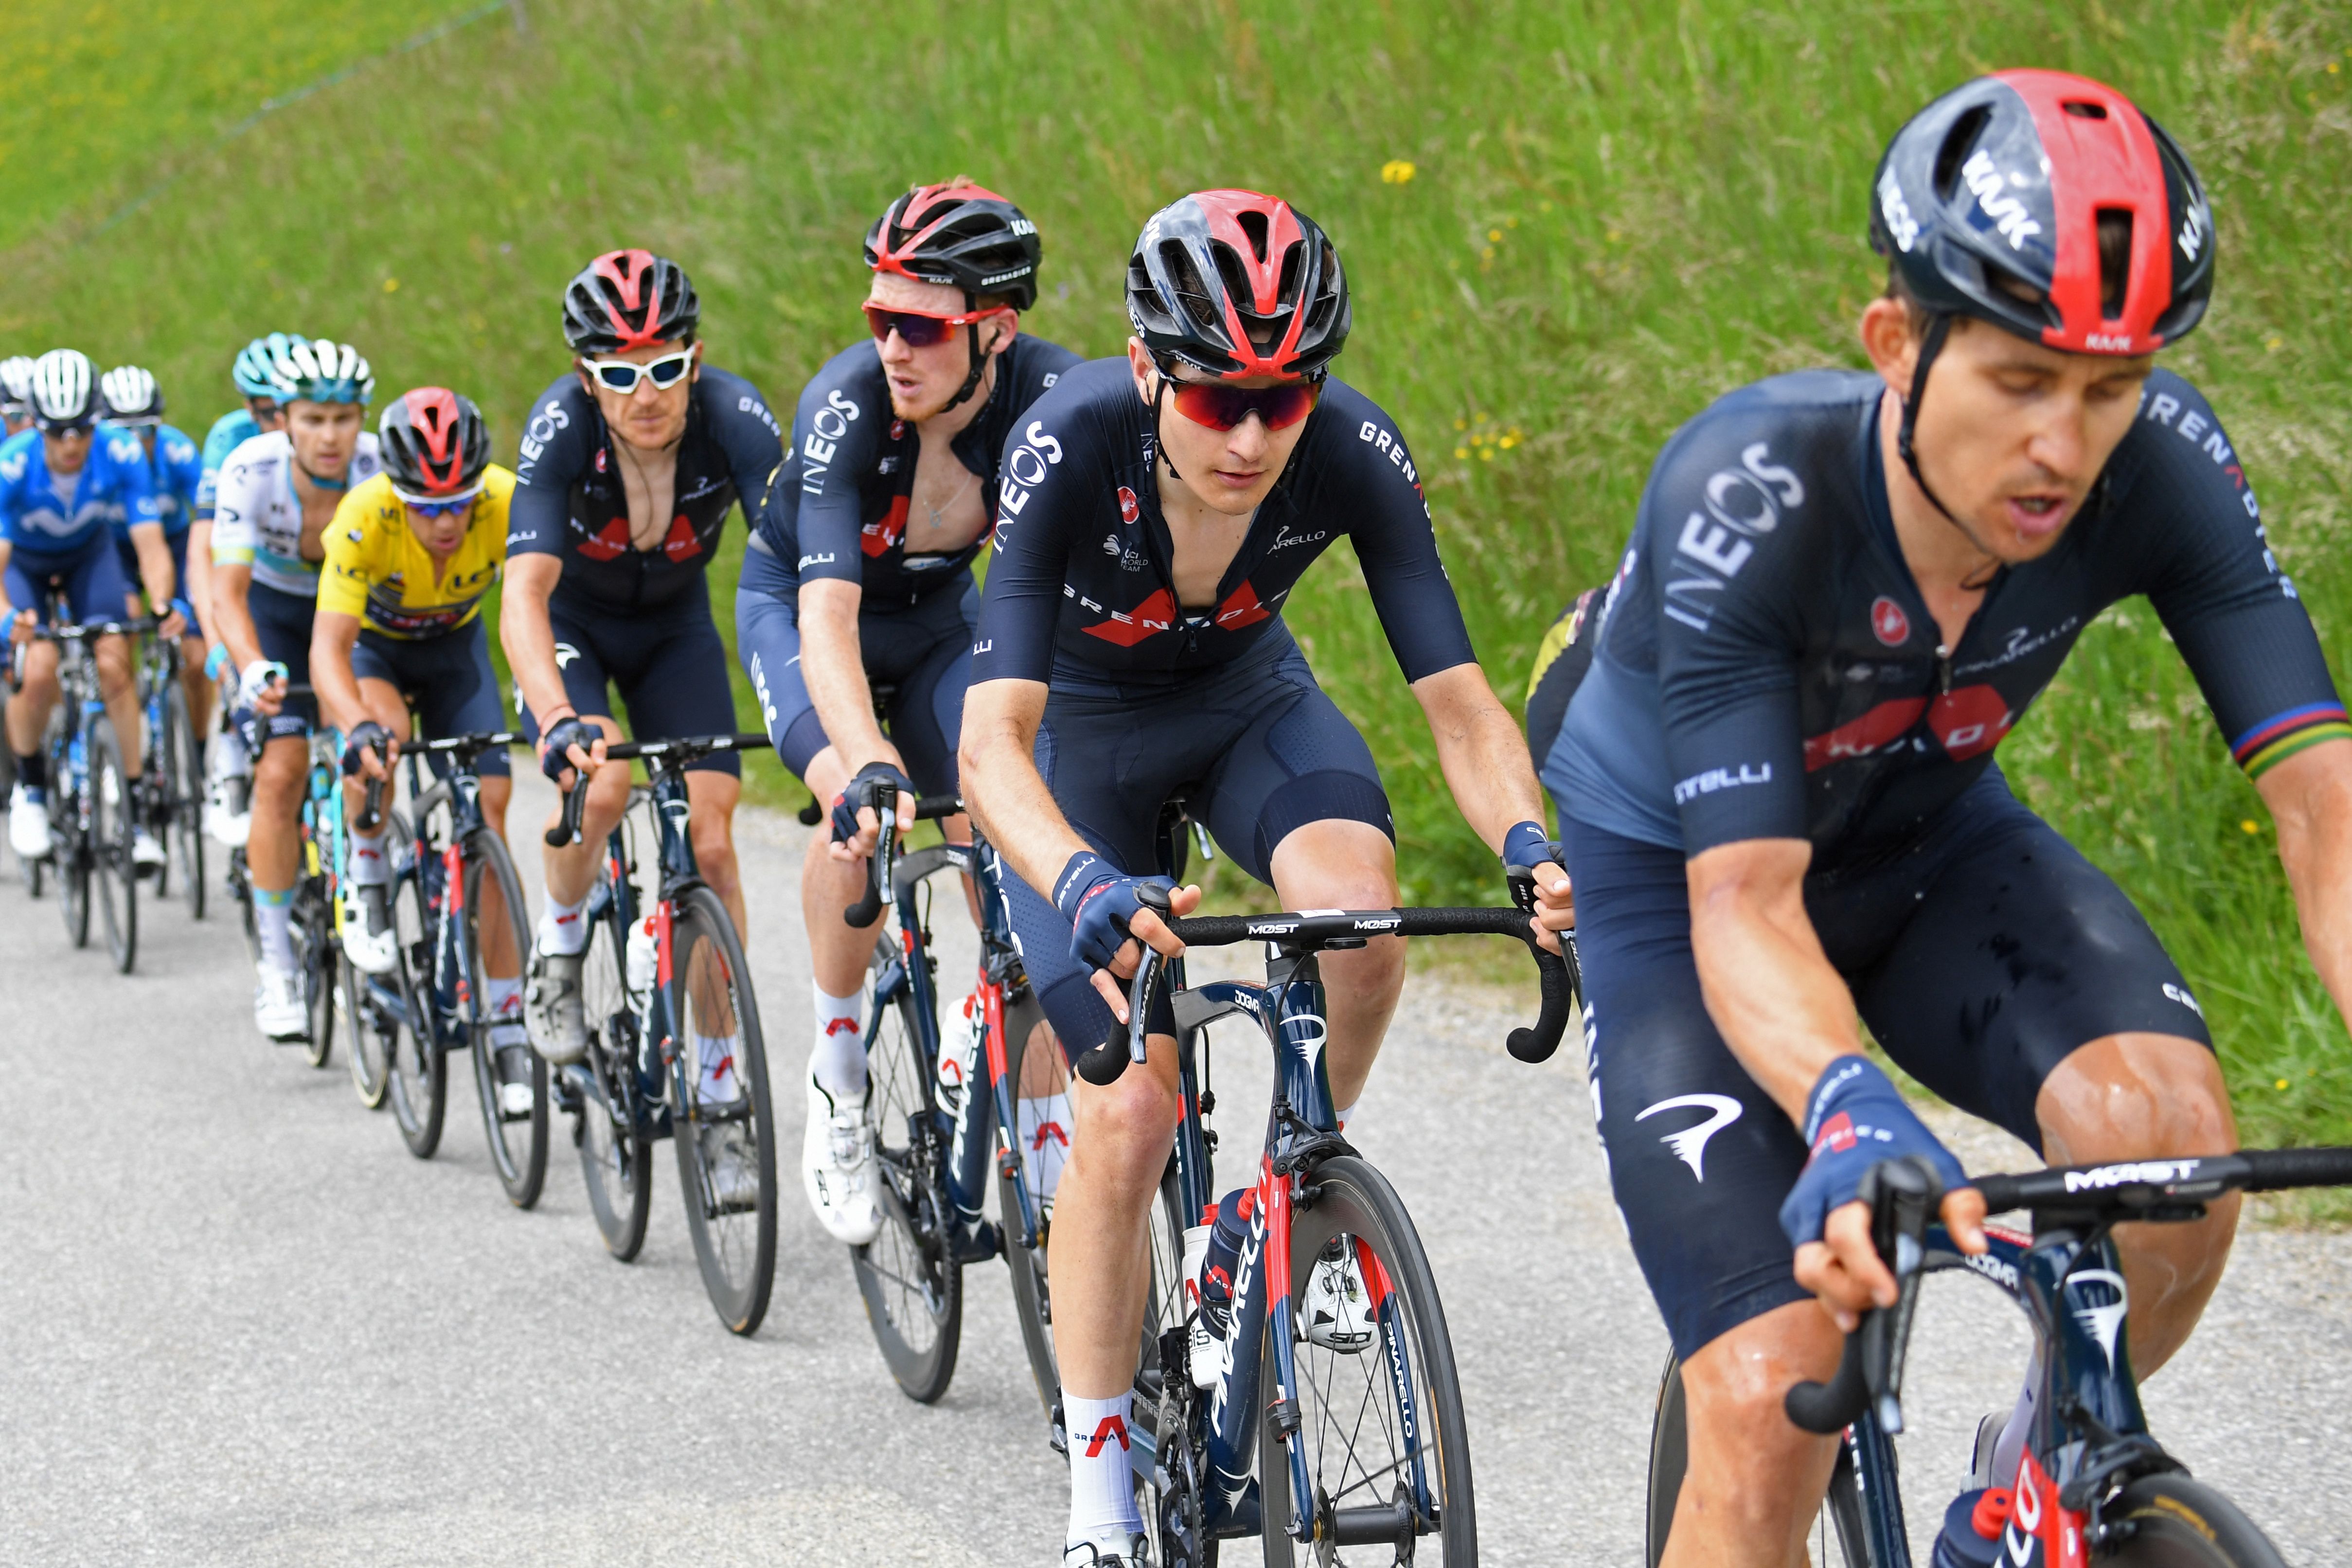 How to watch the Critérium du Dauphiné 2022 Live stream the major French stage race Cycling Weekly